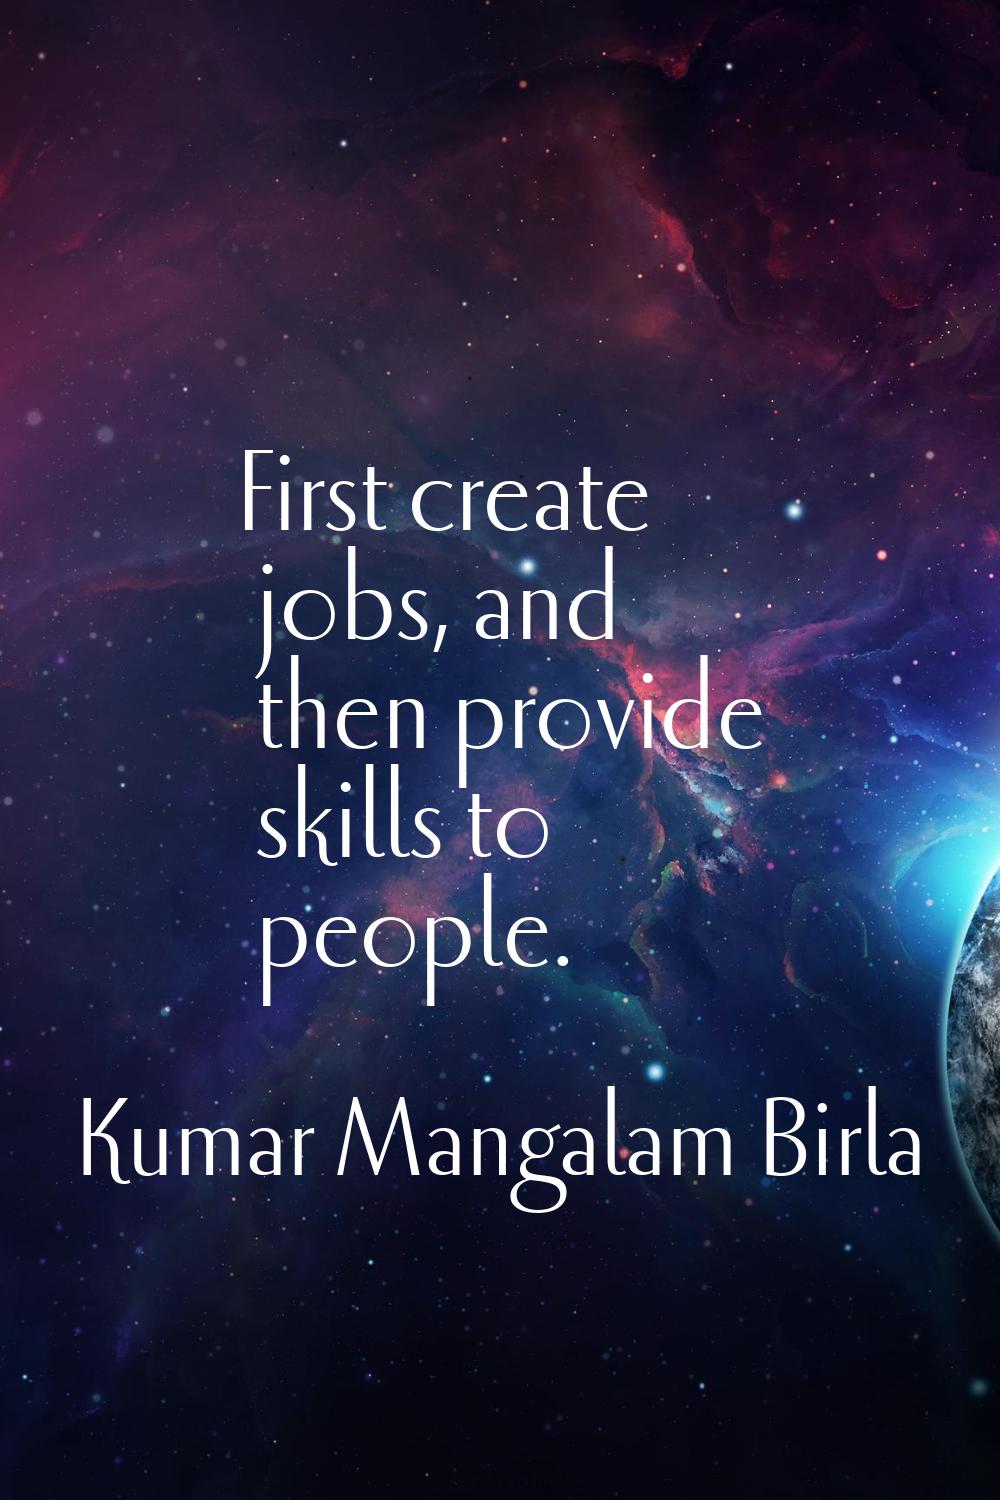 First create jobs, and then provide skills to people.